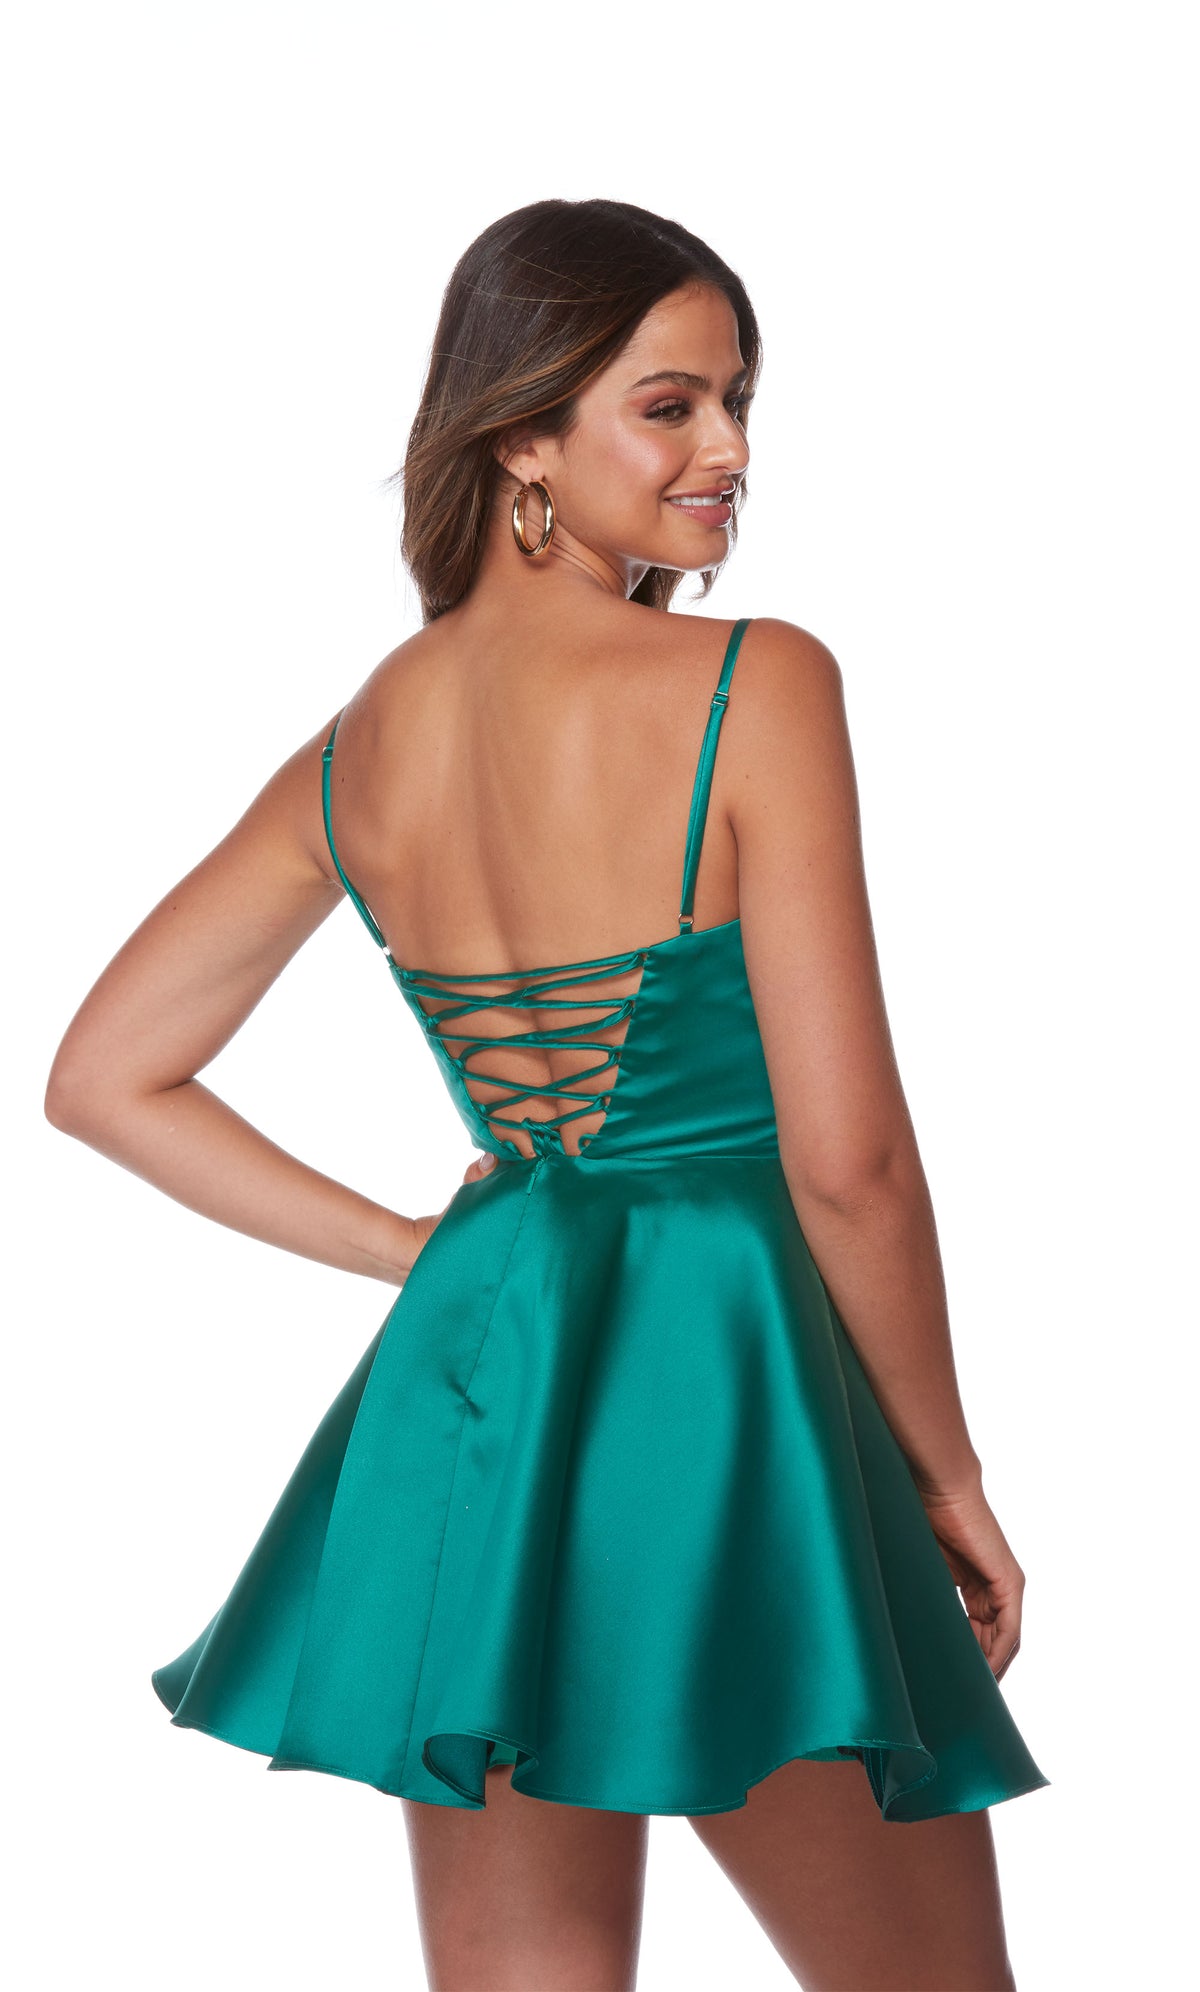 A Mikado scooped neck short formal dress with a lace-up back and flared A-line skirt, in pine green.